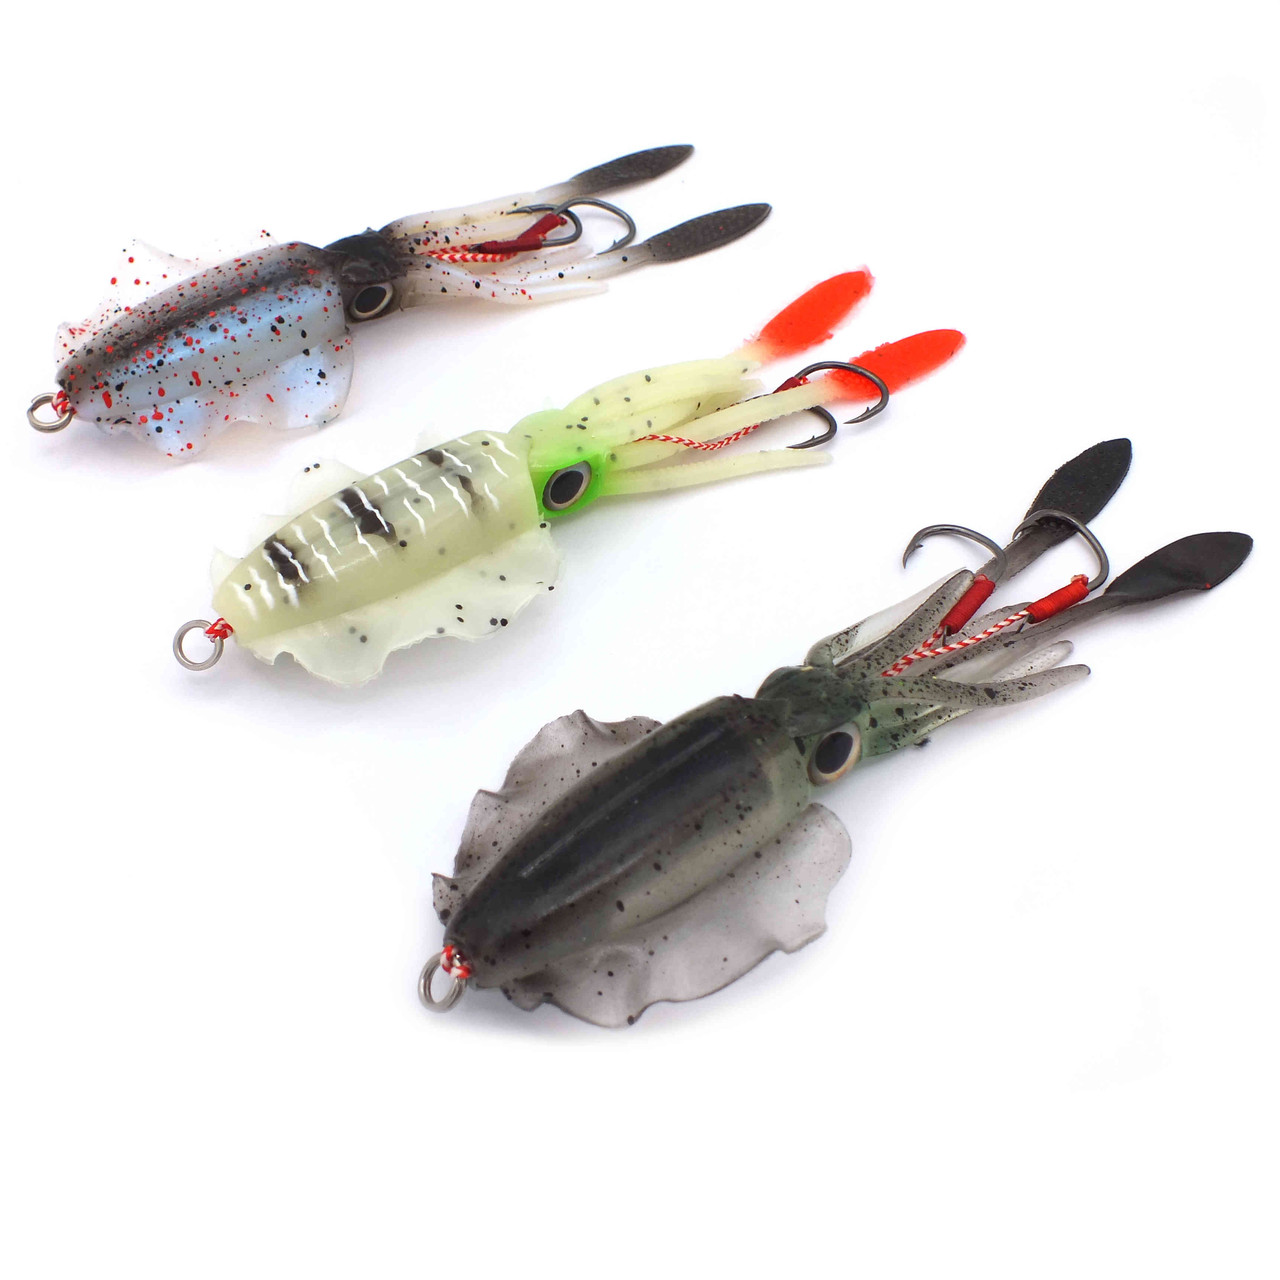 Chomp Lures Colossal Squid Rigged Soft Plastics Kingfish Lures x 3 150mm  60g - Wholesale Fishing Supplies